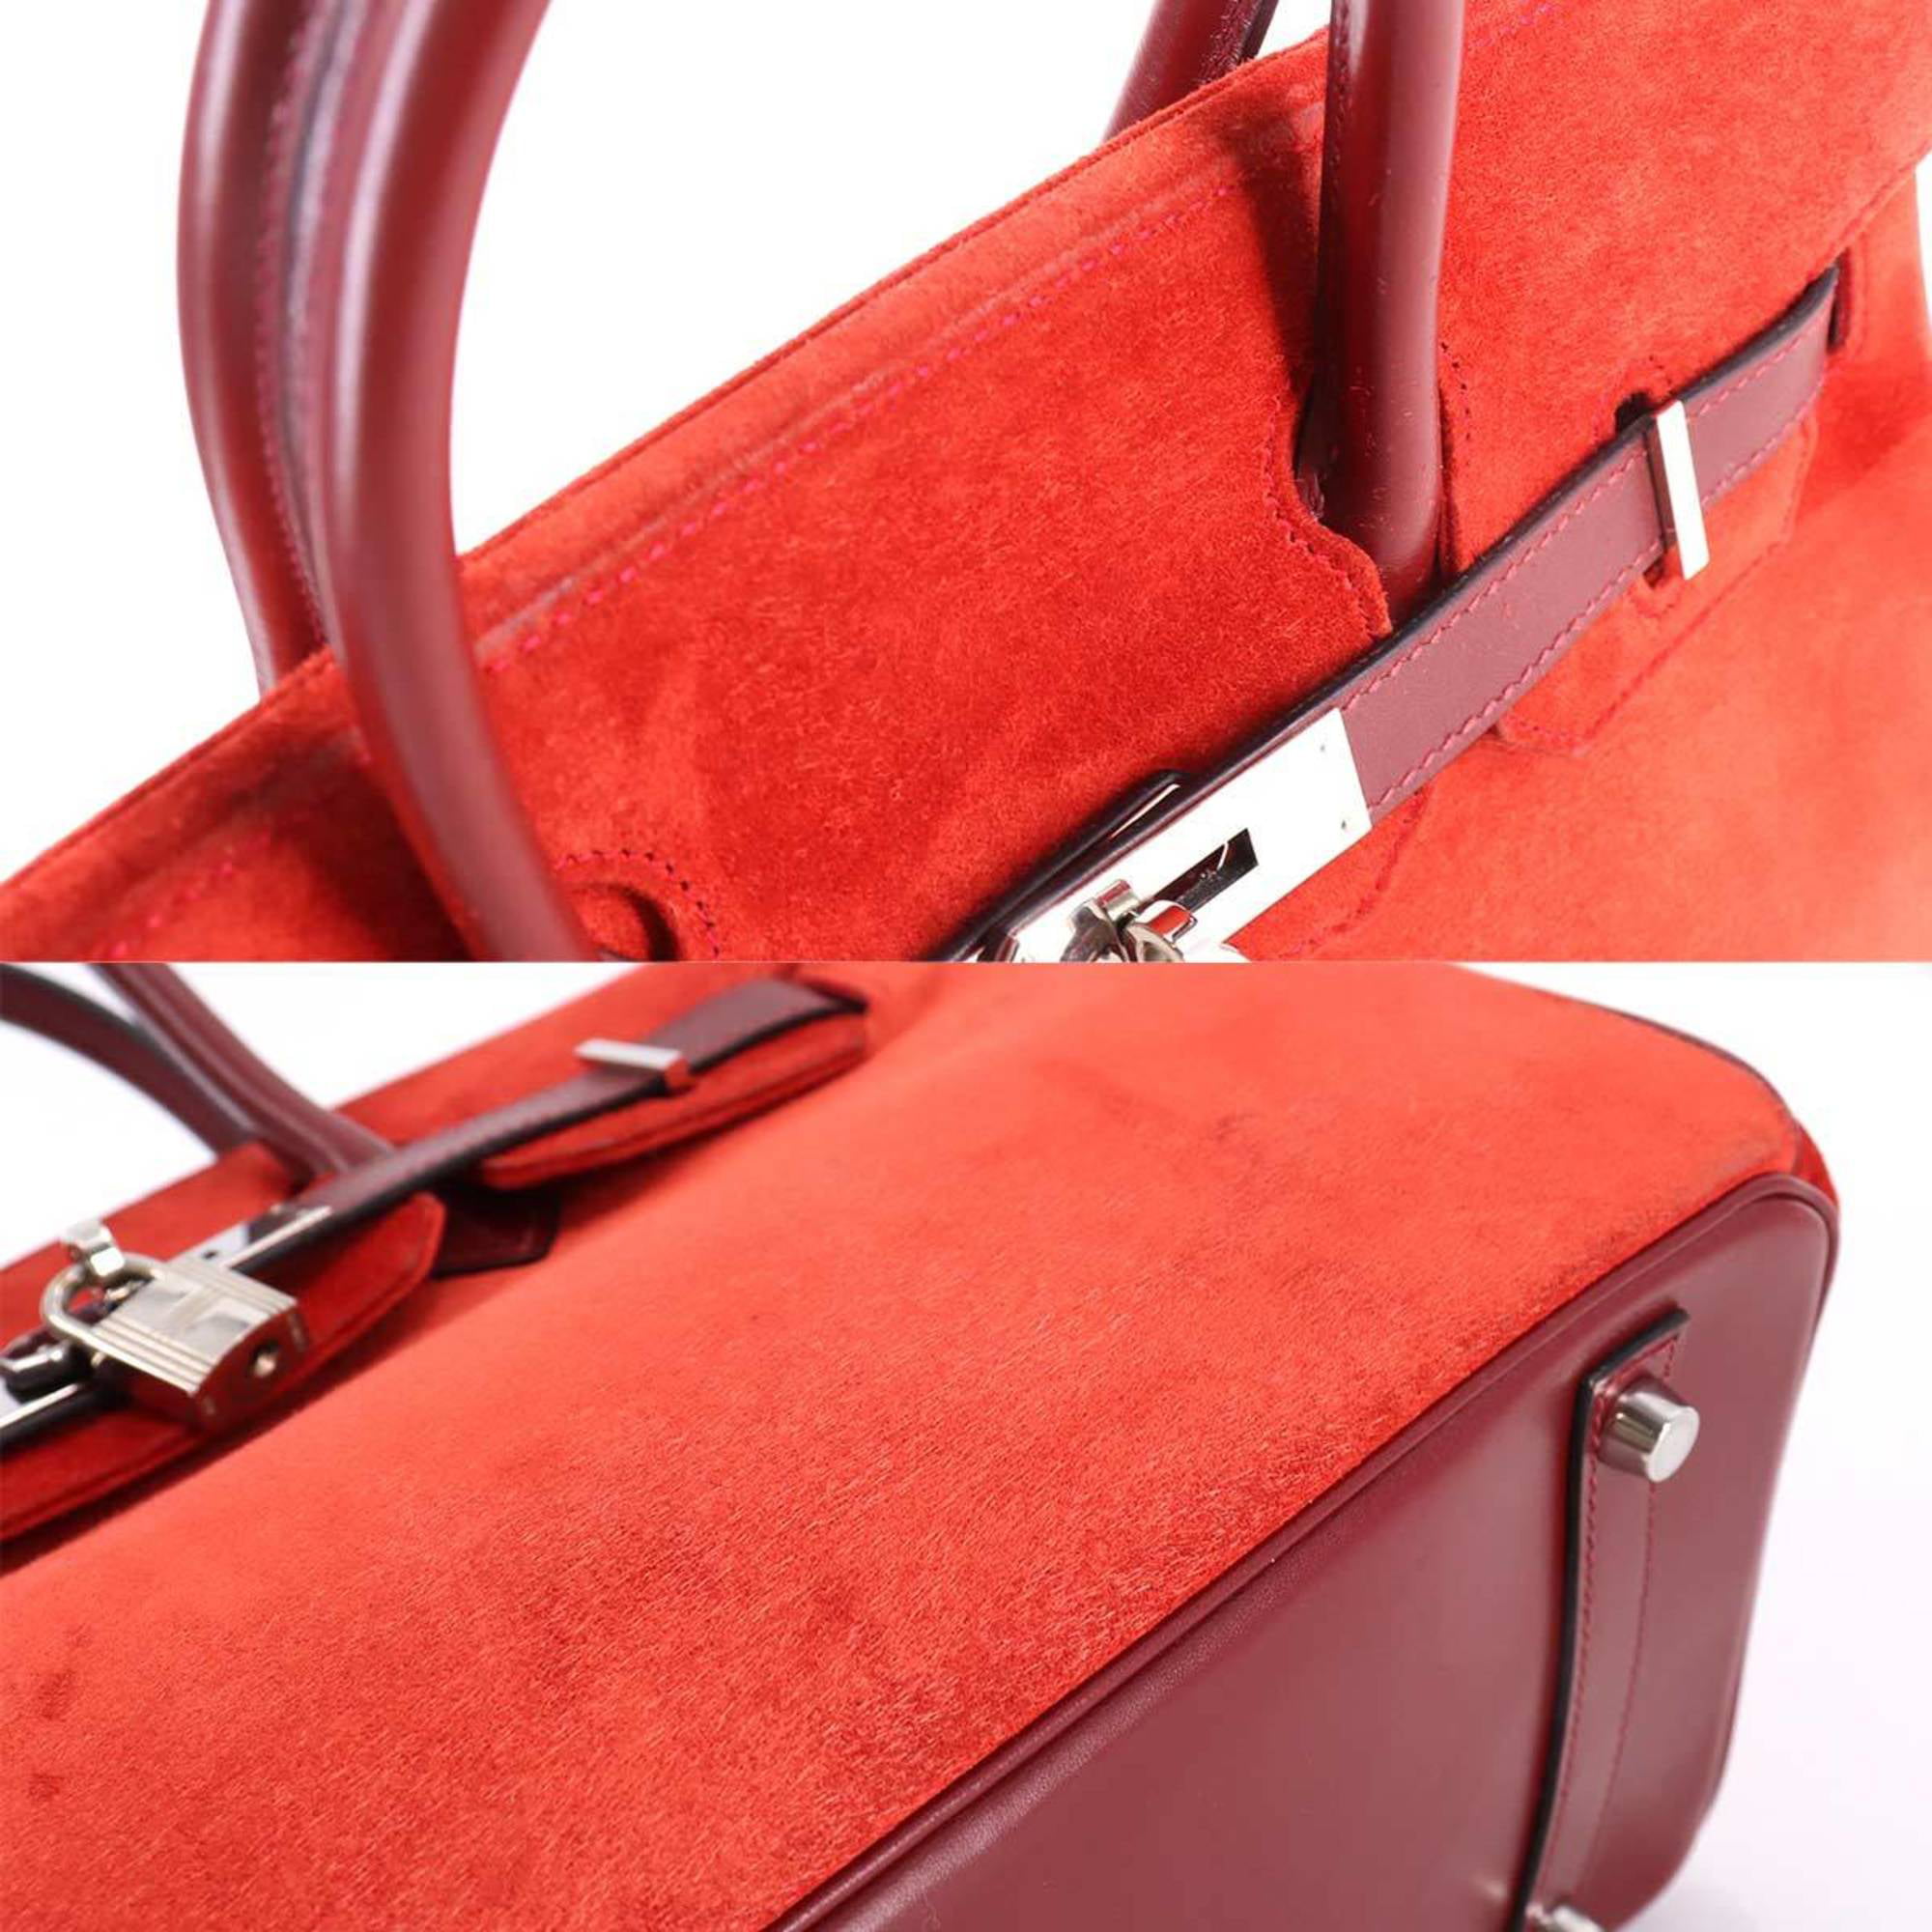 Hermès - Authenticated Birkin 30 Handbag - Leather Red for Women, Very Good Condition